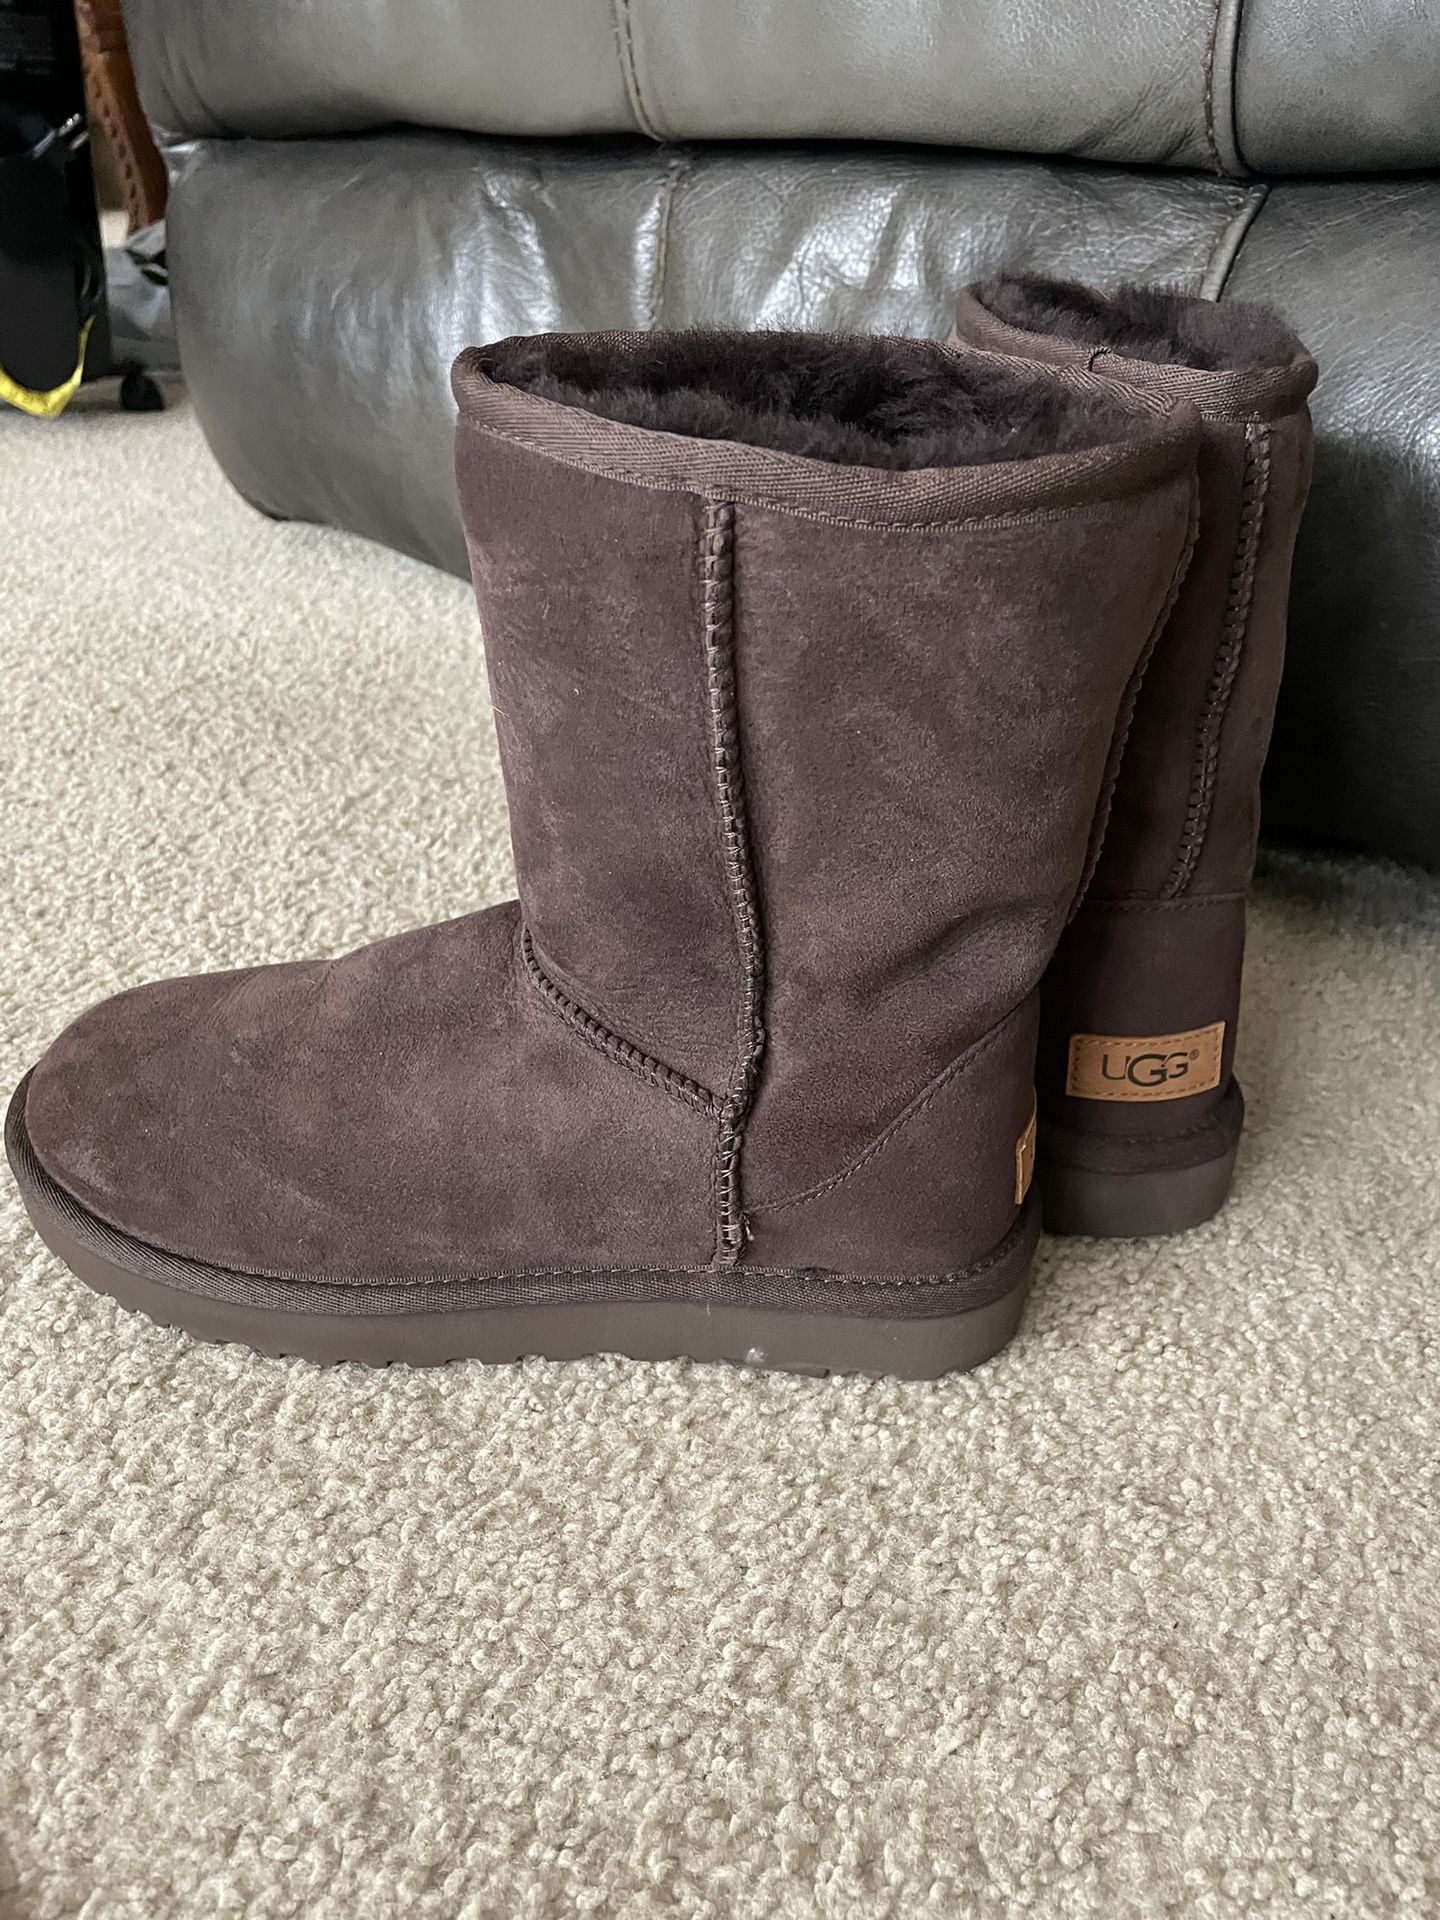 Classic Uggs Boots Size 7 New Retails For 180$